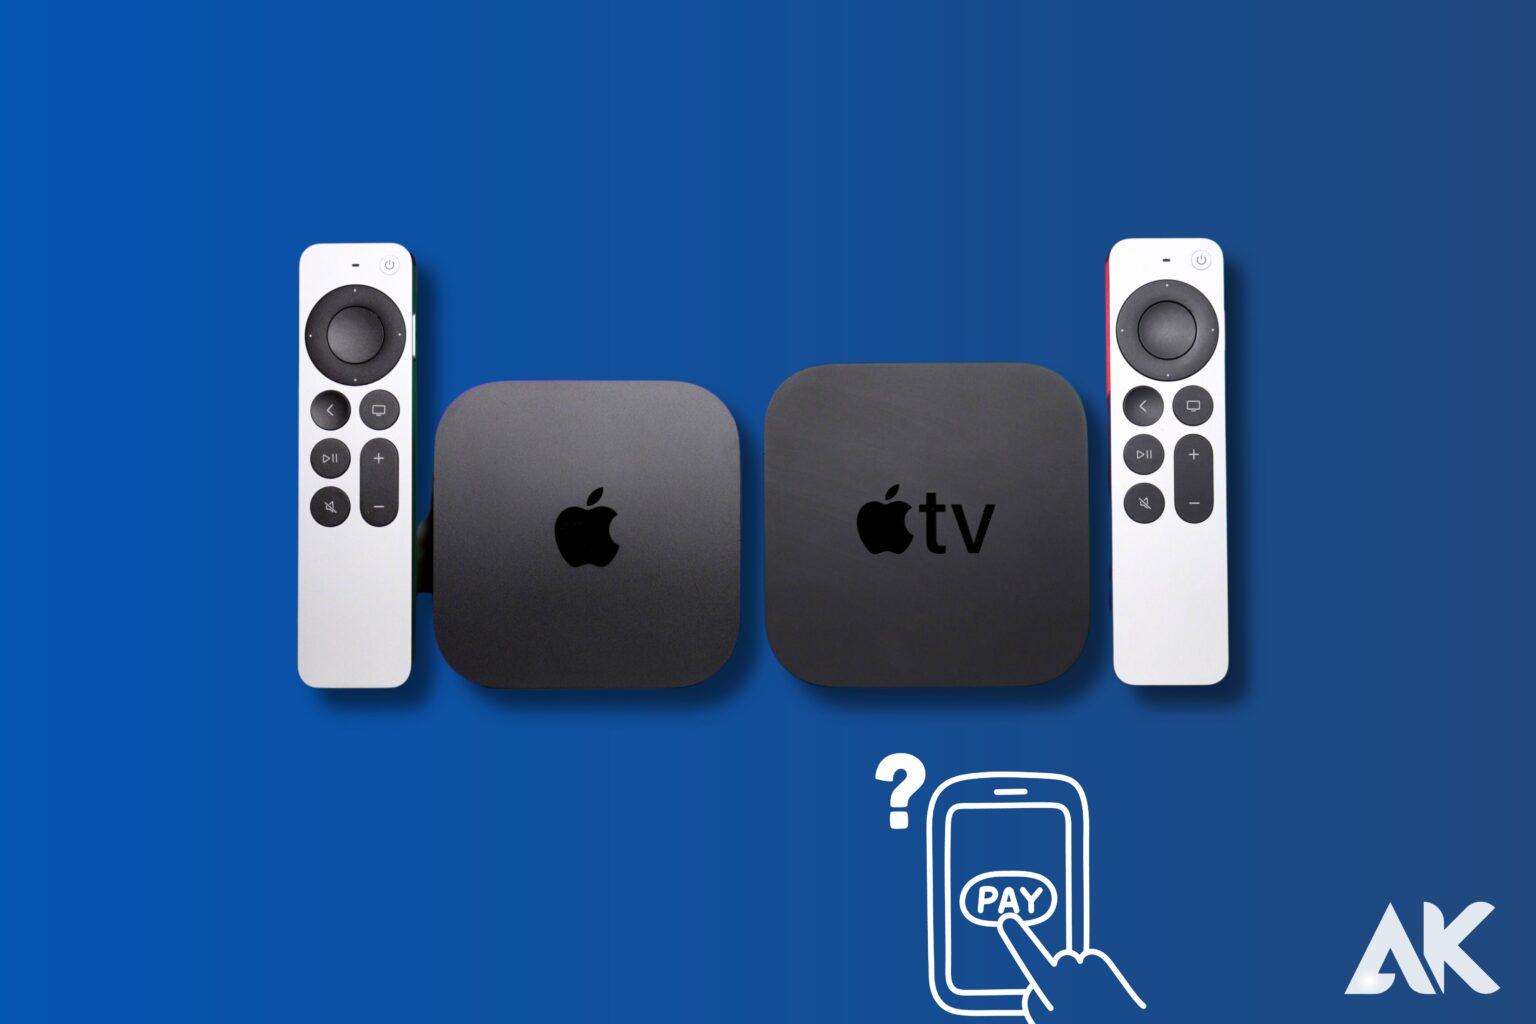 How do you pay for Apple TV?